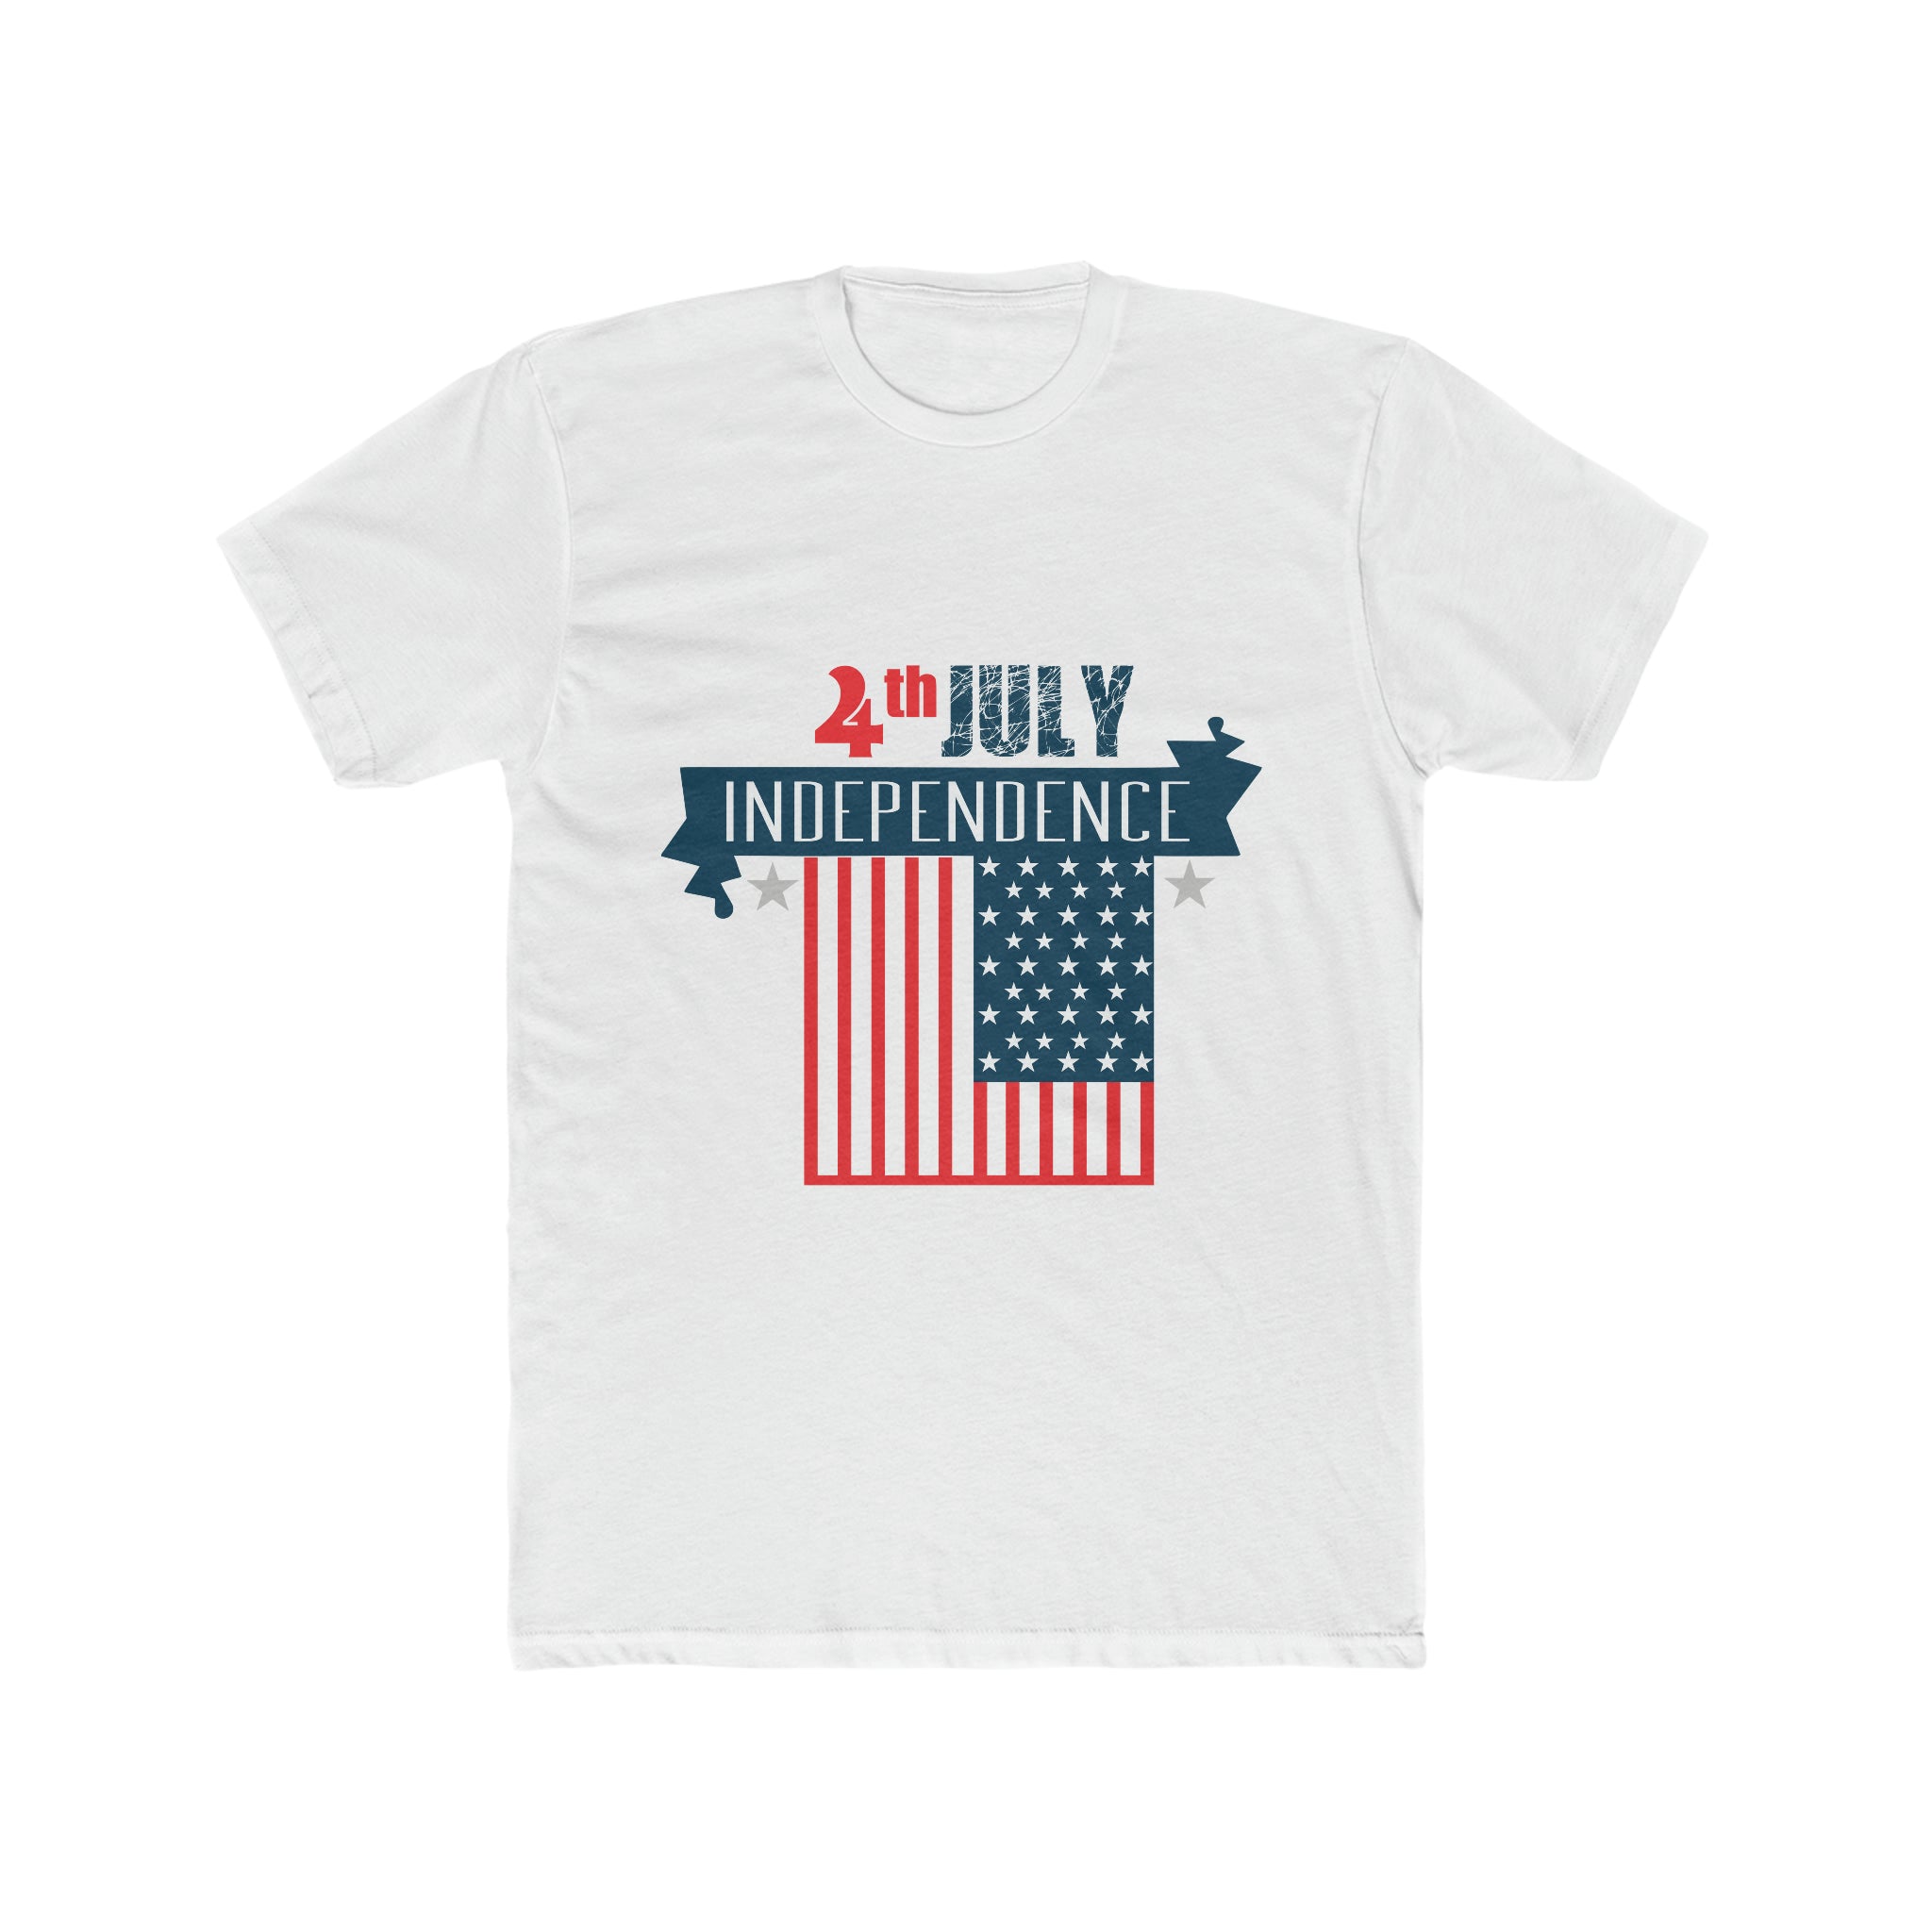 4th of July Independence day Men's Cotton Crew Tee